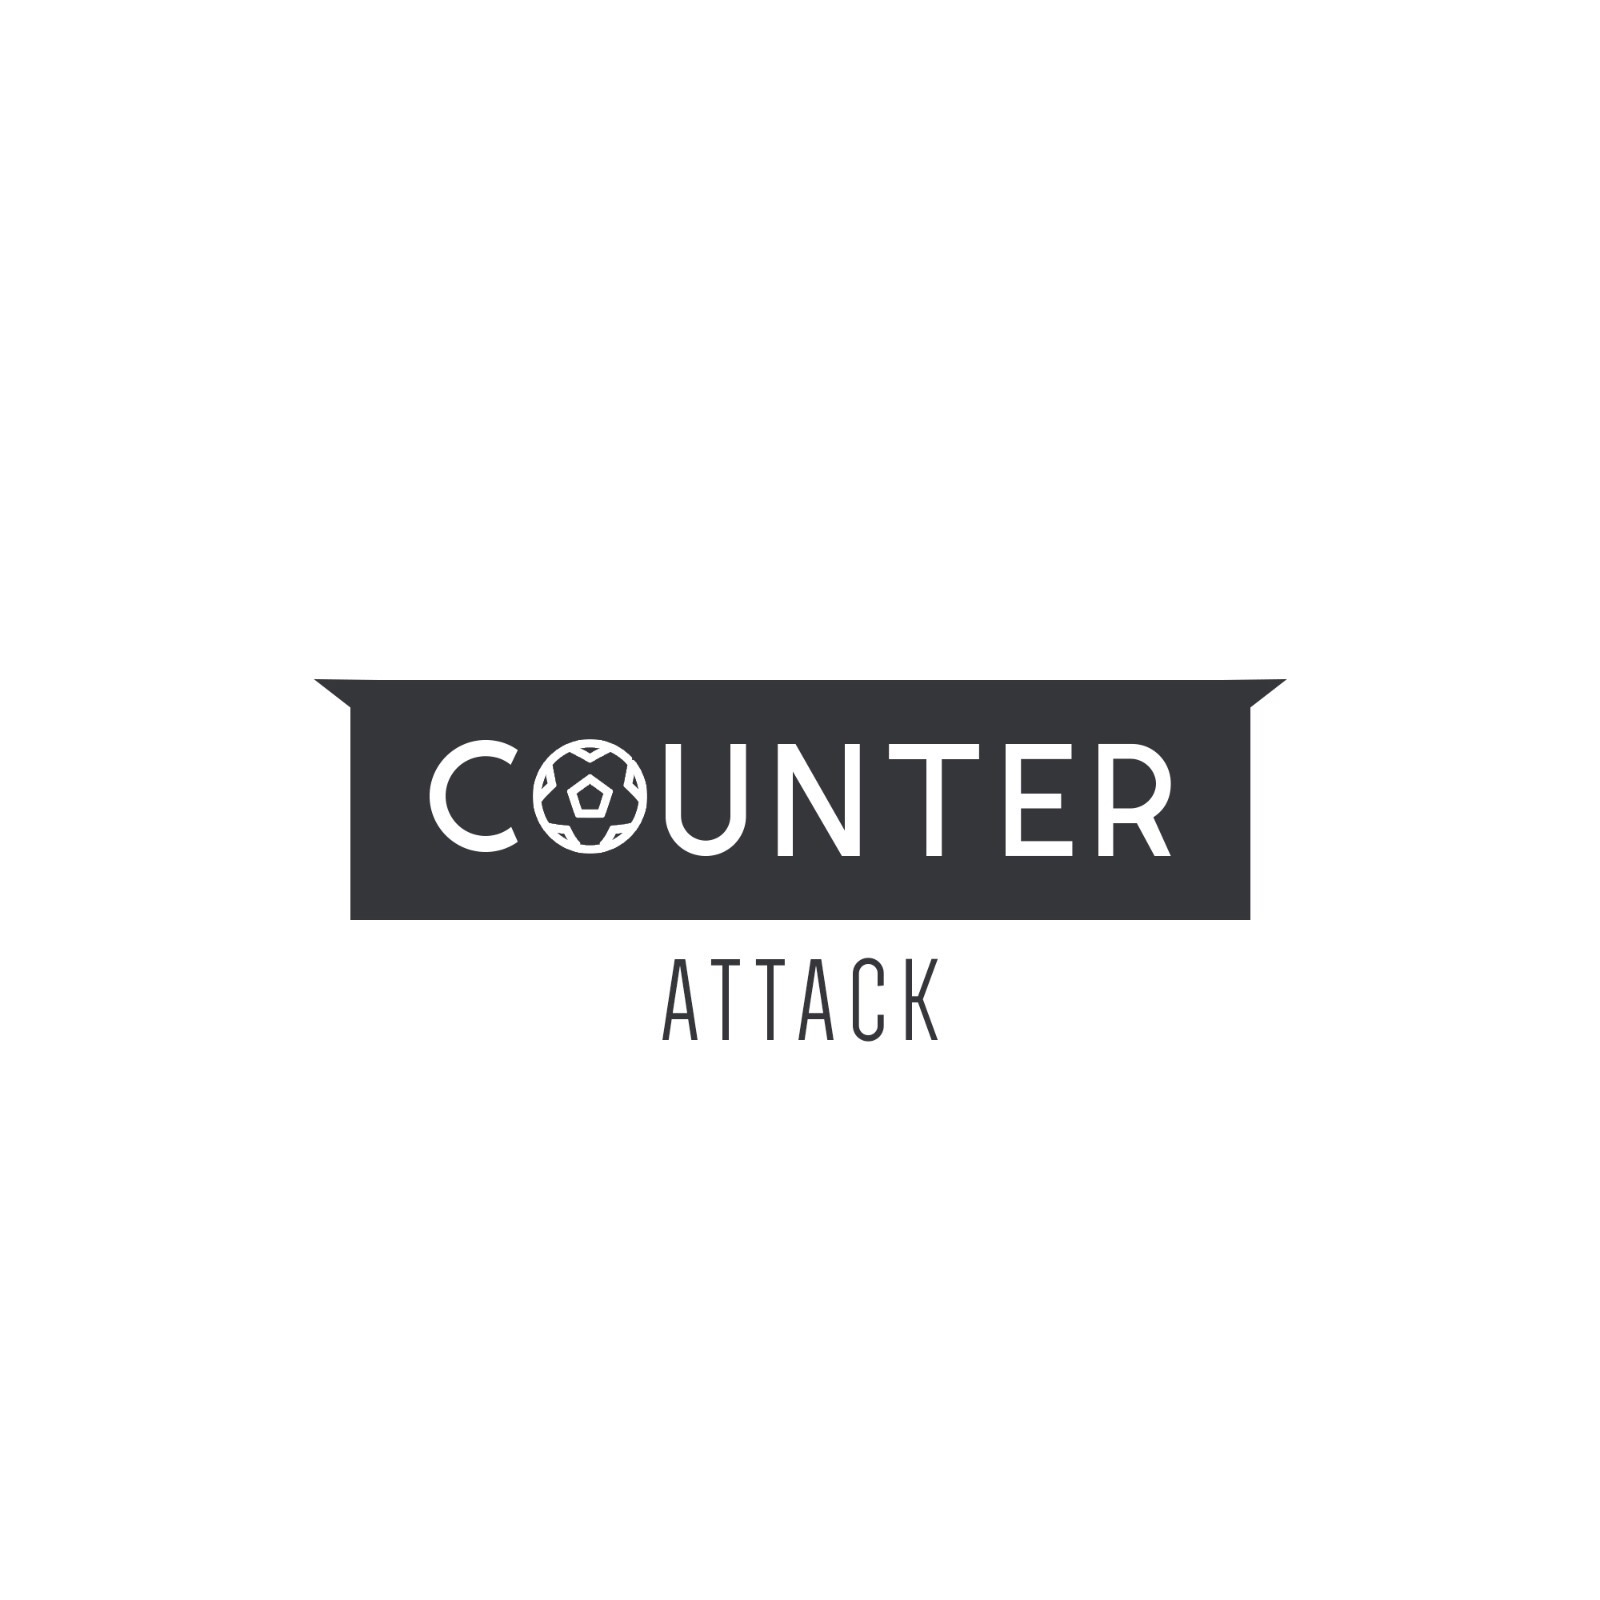 Counter Attack - Episode 121 - Christian Kabasele Relaxed and Ready To Play!